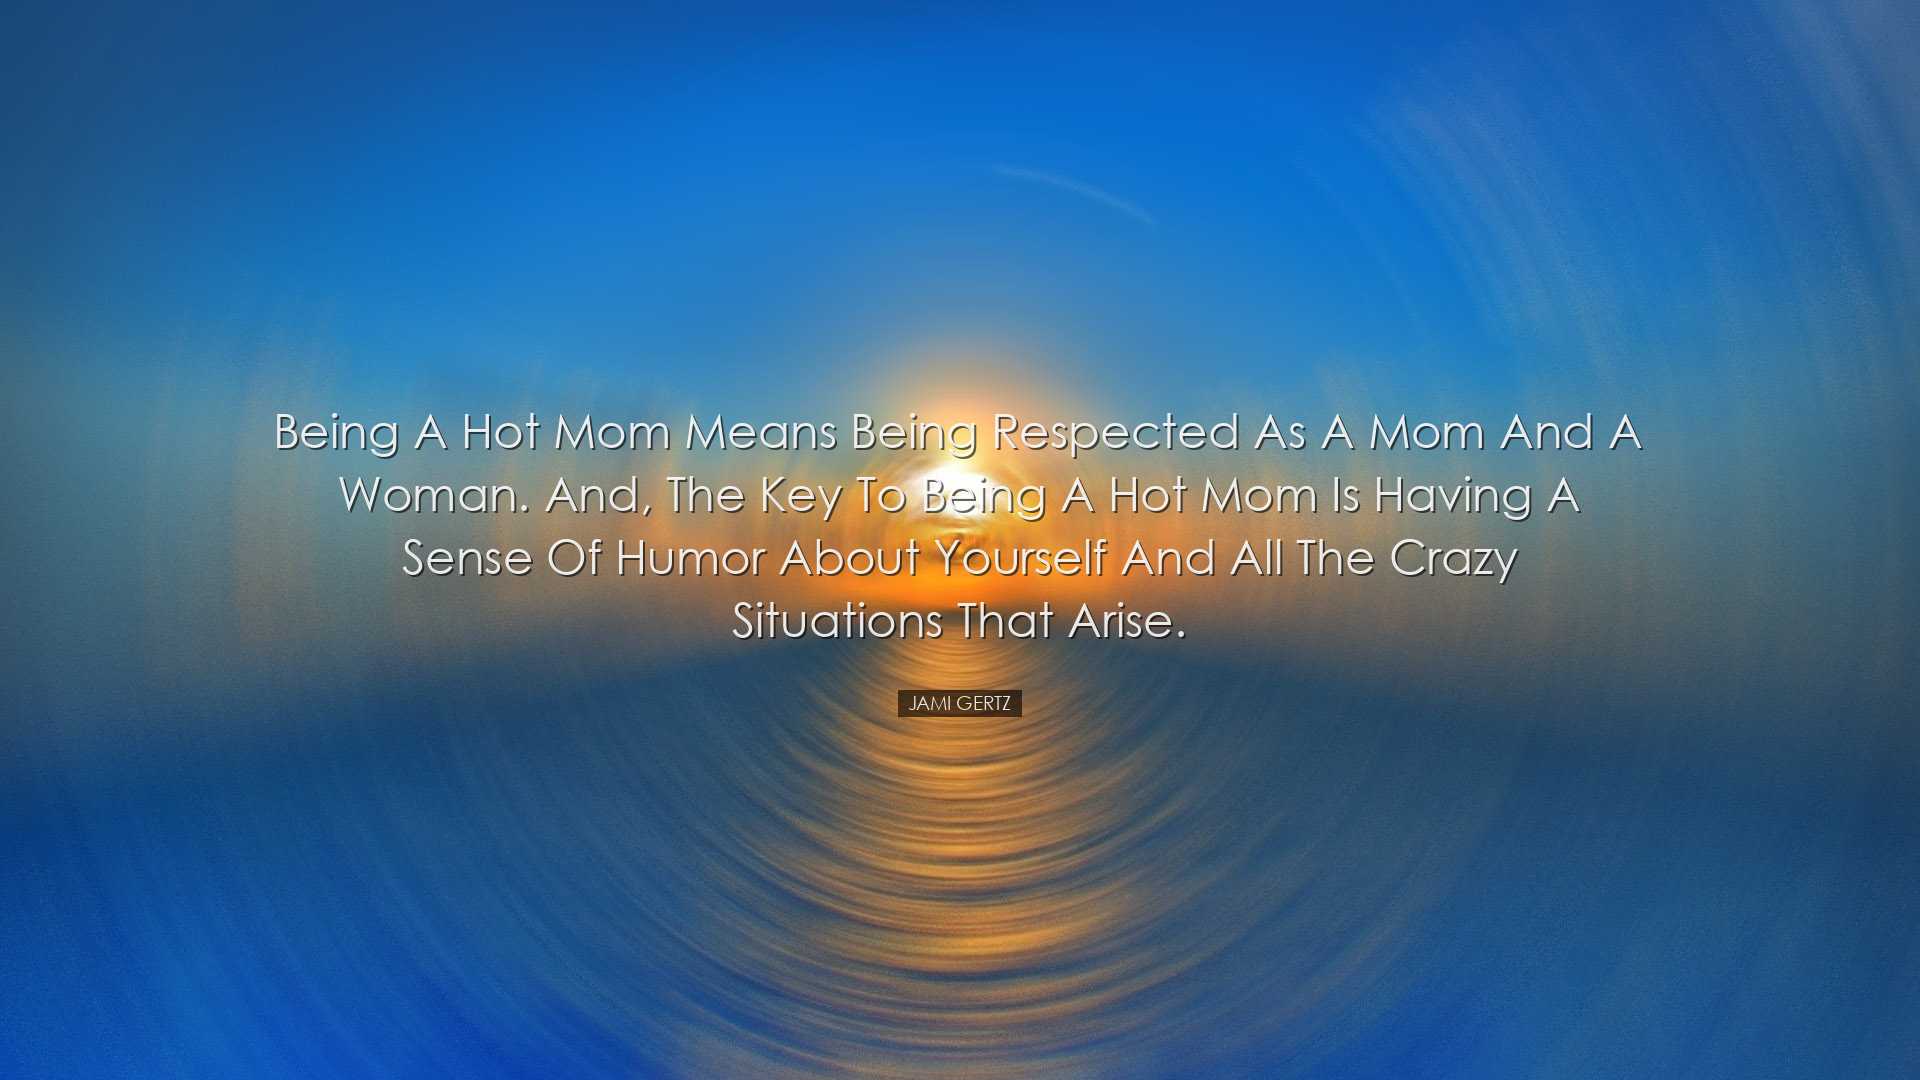 Being a Hot Mom means being respected as a mom and a woman. And, t